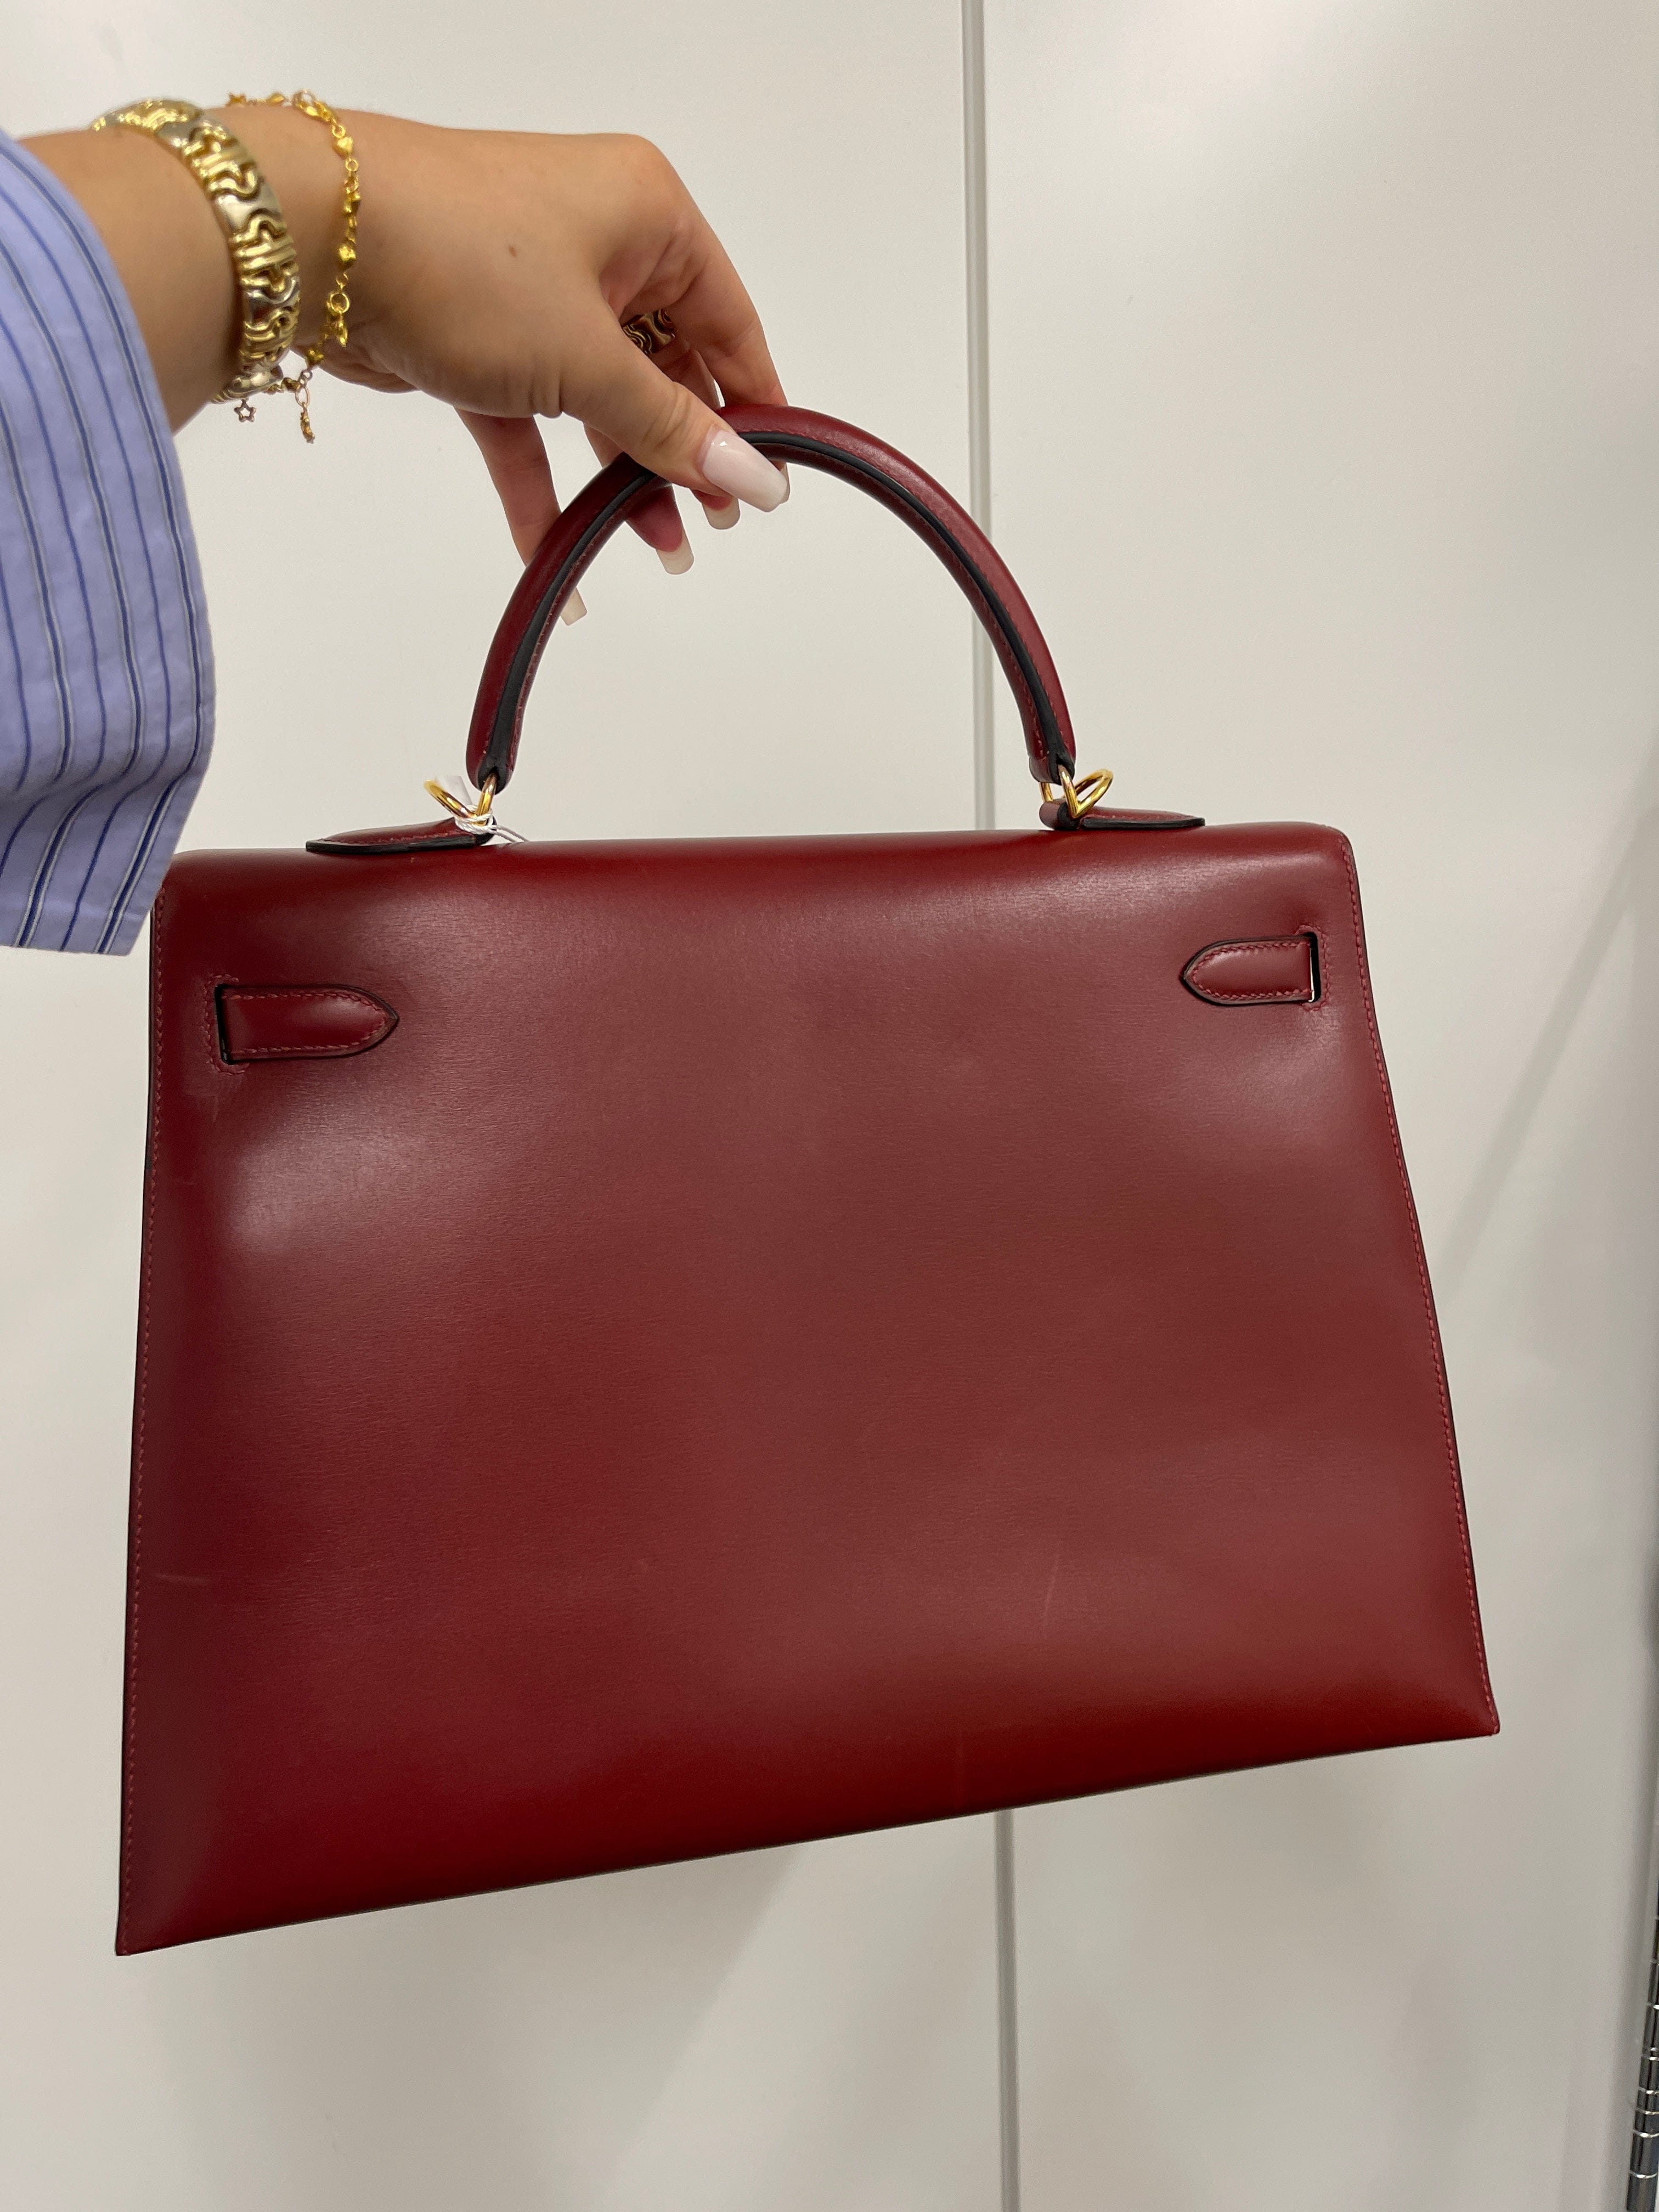 Hermes Hermes Kelly 35 Rouge H with GHW - AJC0629